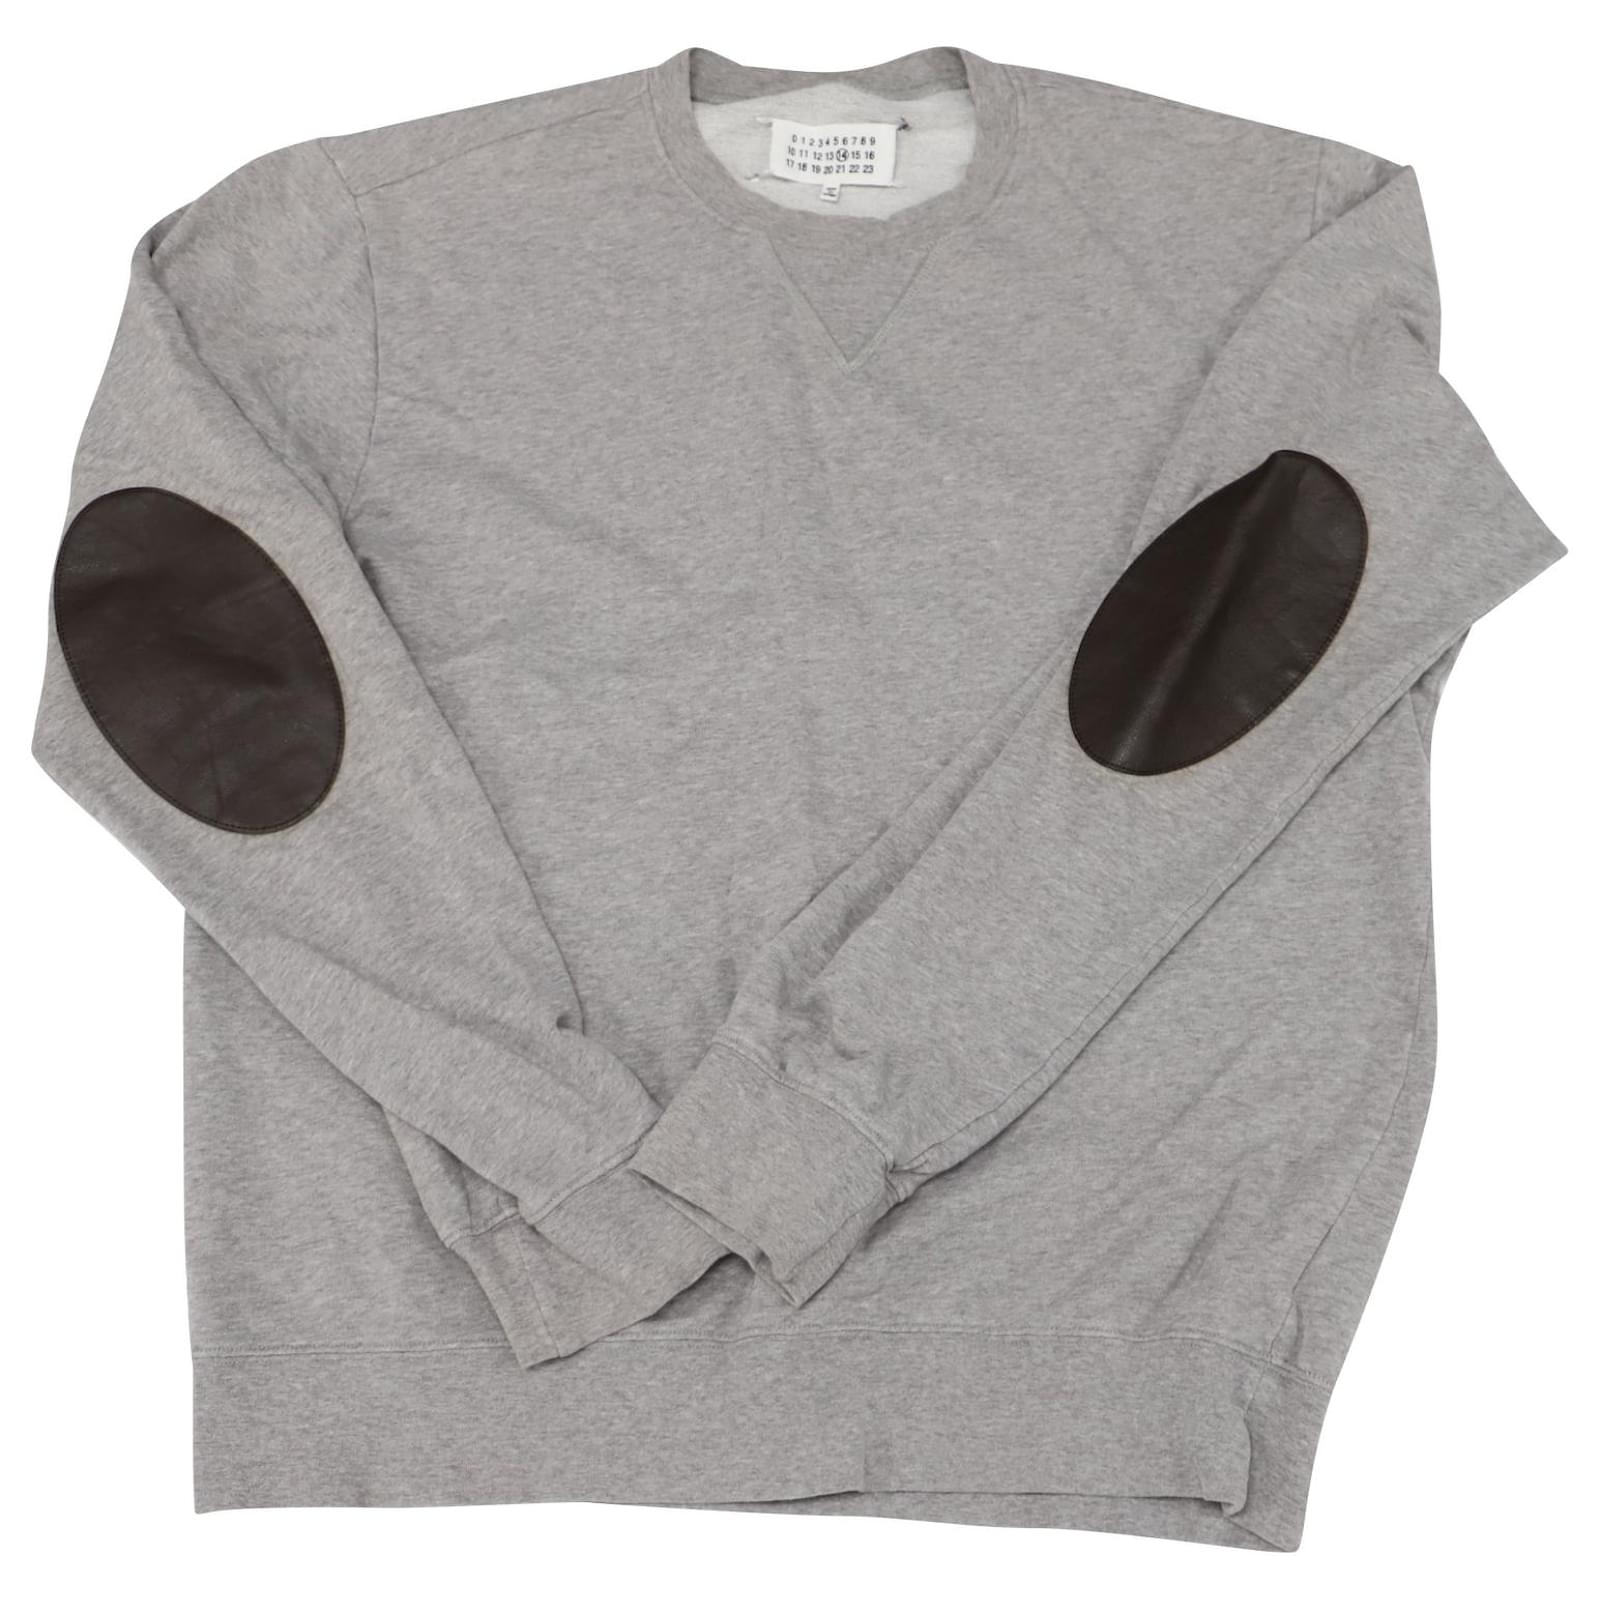 Maison Martin Margiela Crewneck Sweater with Elbow patches in Grey Wool